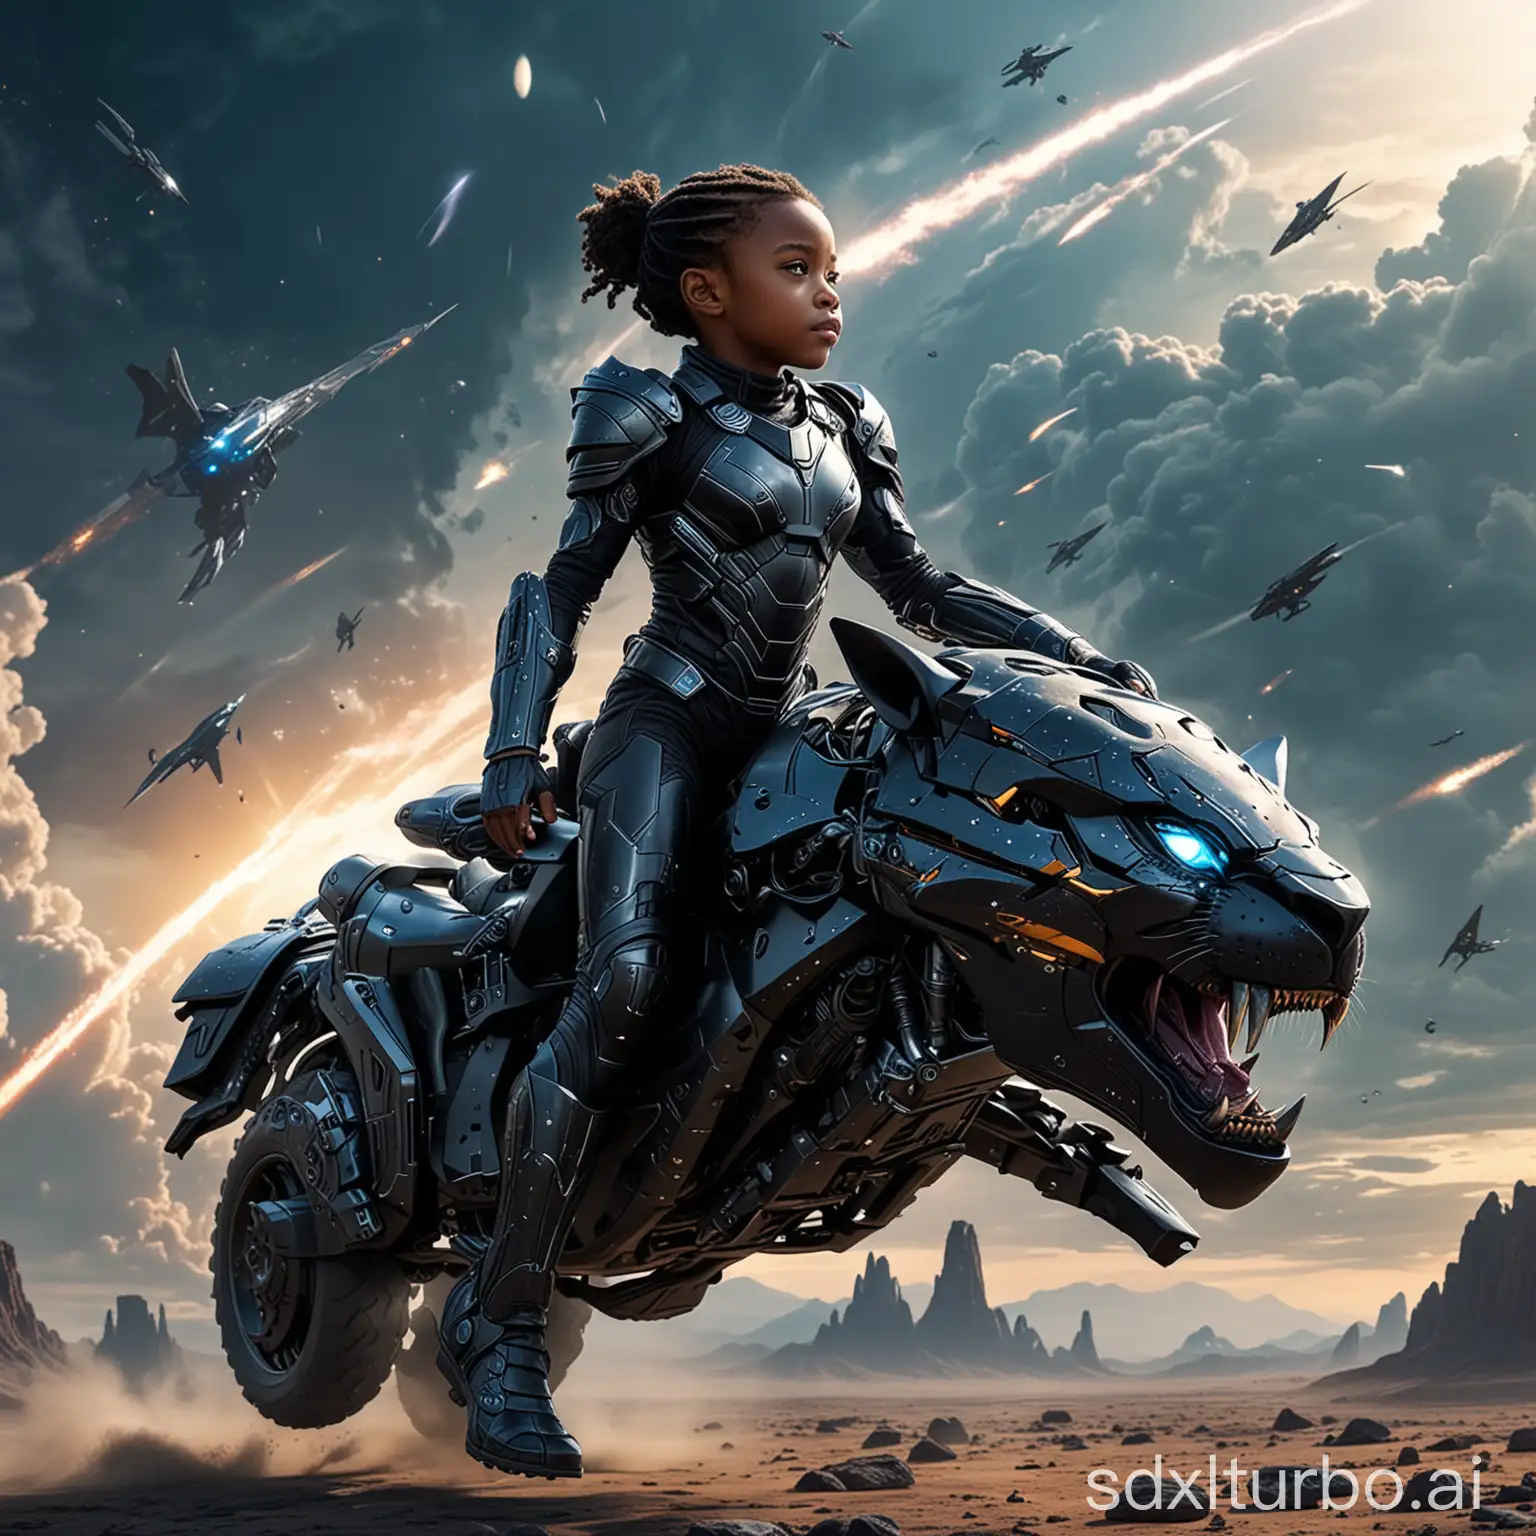 The little girl is wearing a futuristic armor and riding a futuristic mechanical black panther, holding a futuristic weapon. On the vast universe planet, the panther rises into the air, with movie lighting effects and panoramic shots